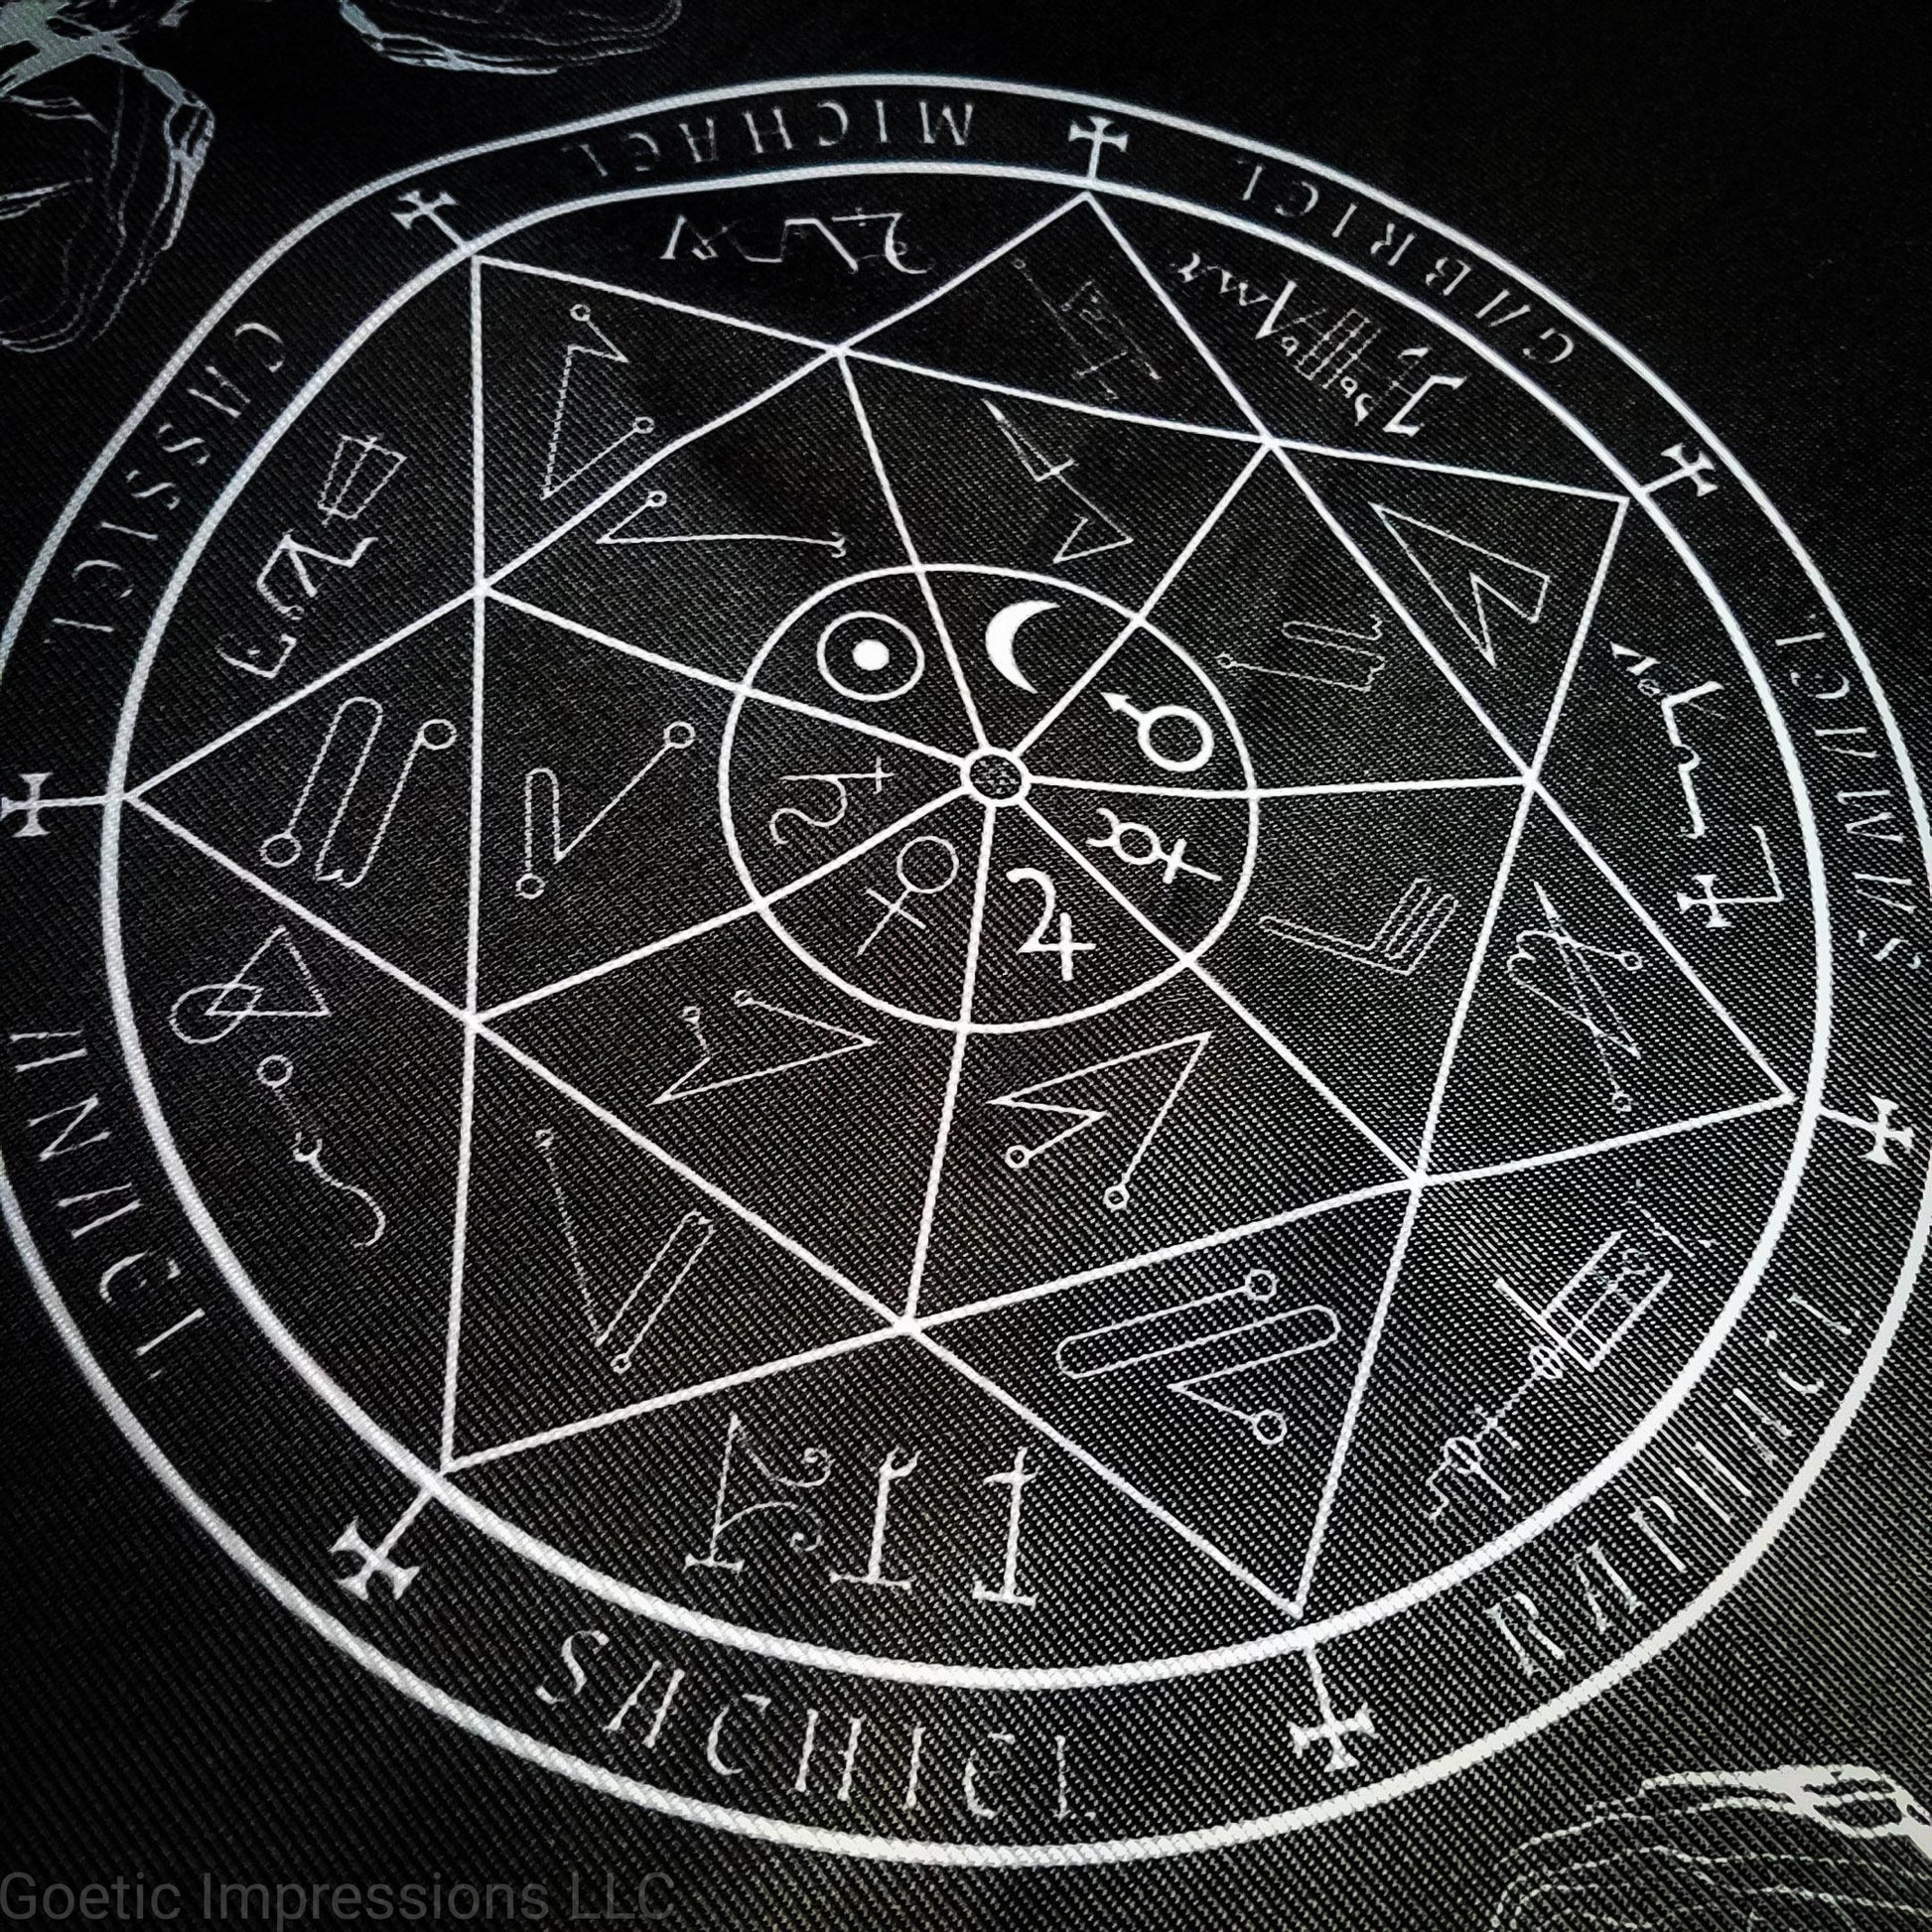 A black and white altar cloth with a seal of the planetary Archangels in the center. The seal contains various astrological sigils.